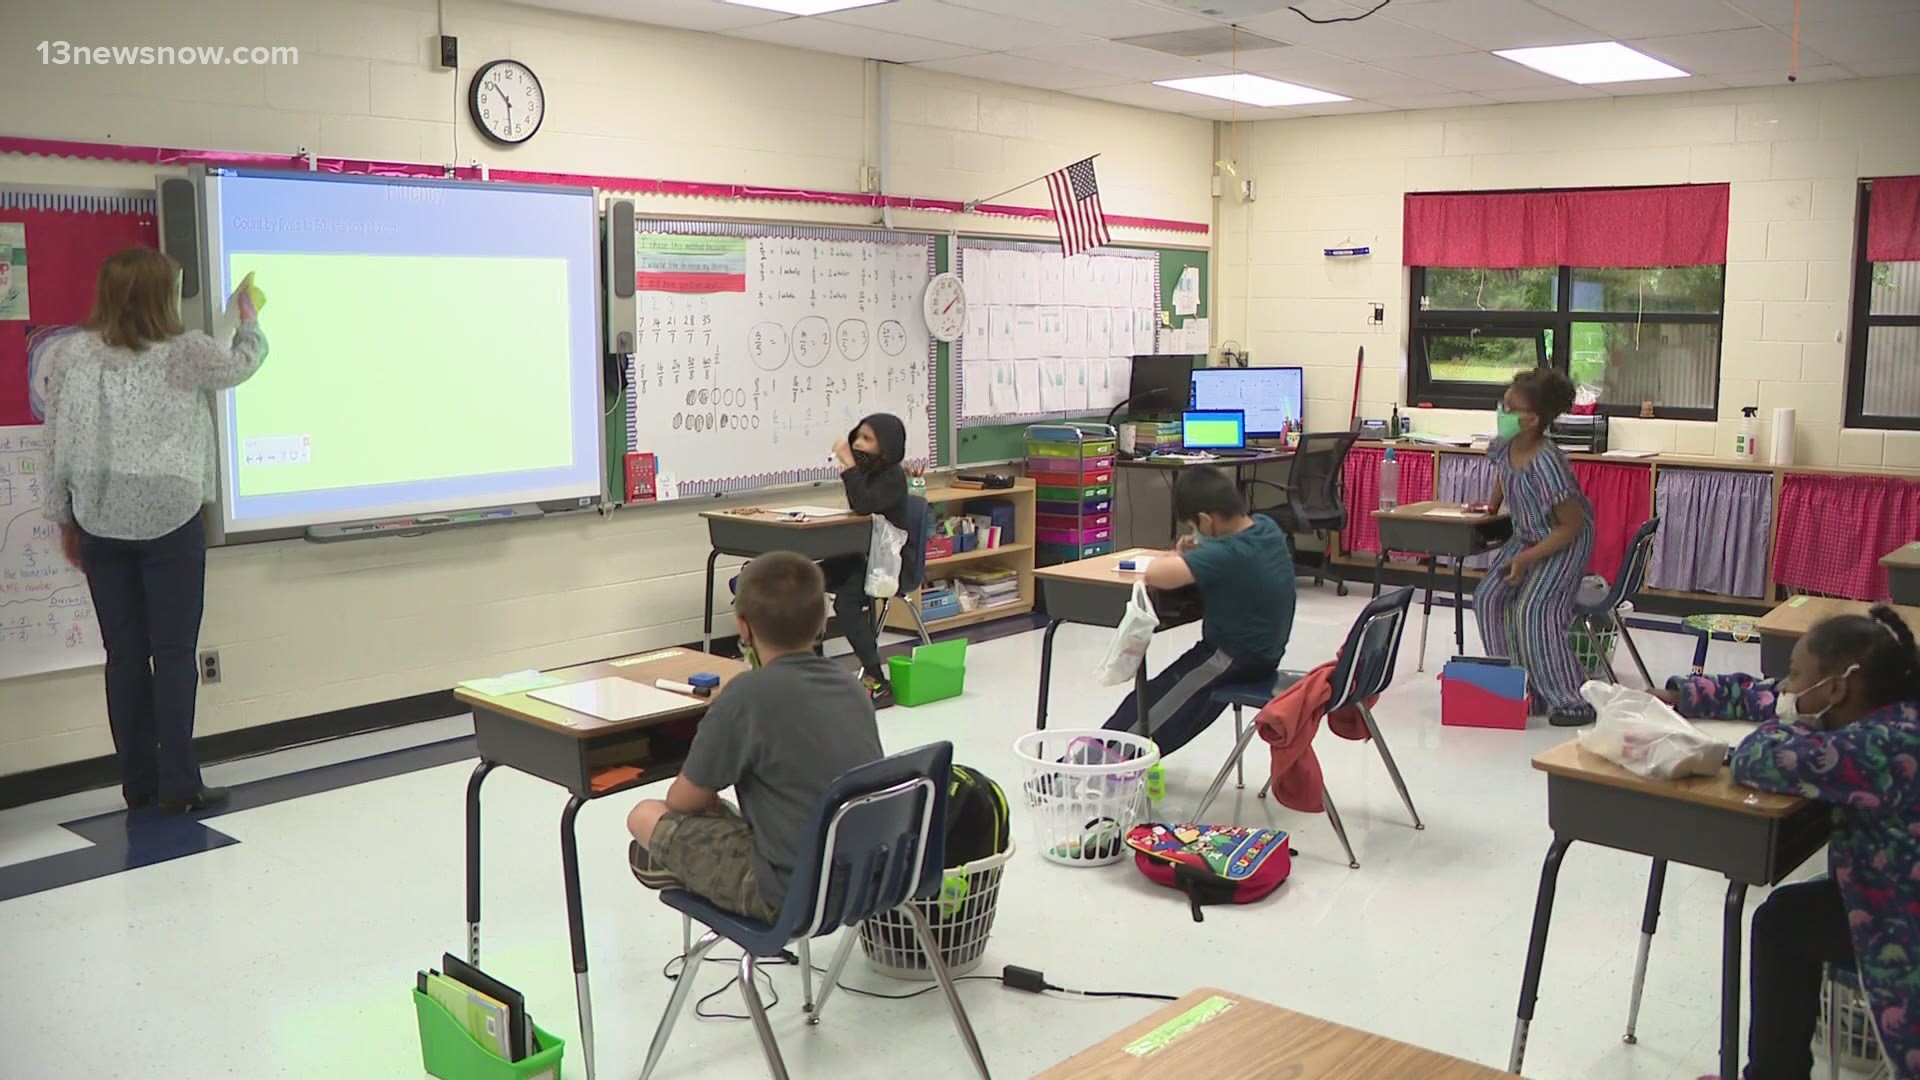 Several public school districts in Hampton Roads are beefing up their summer academic programs to help kids who suffered through virtual learning.